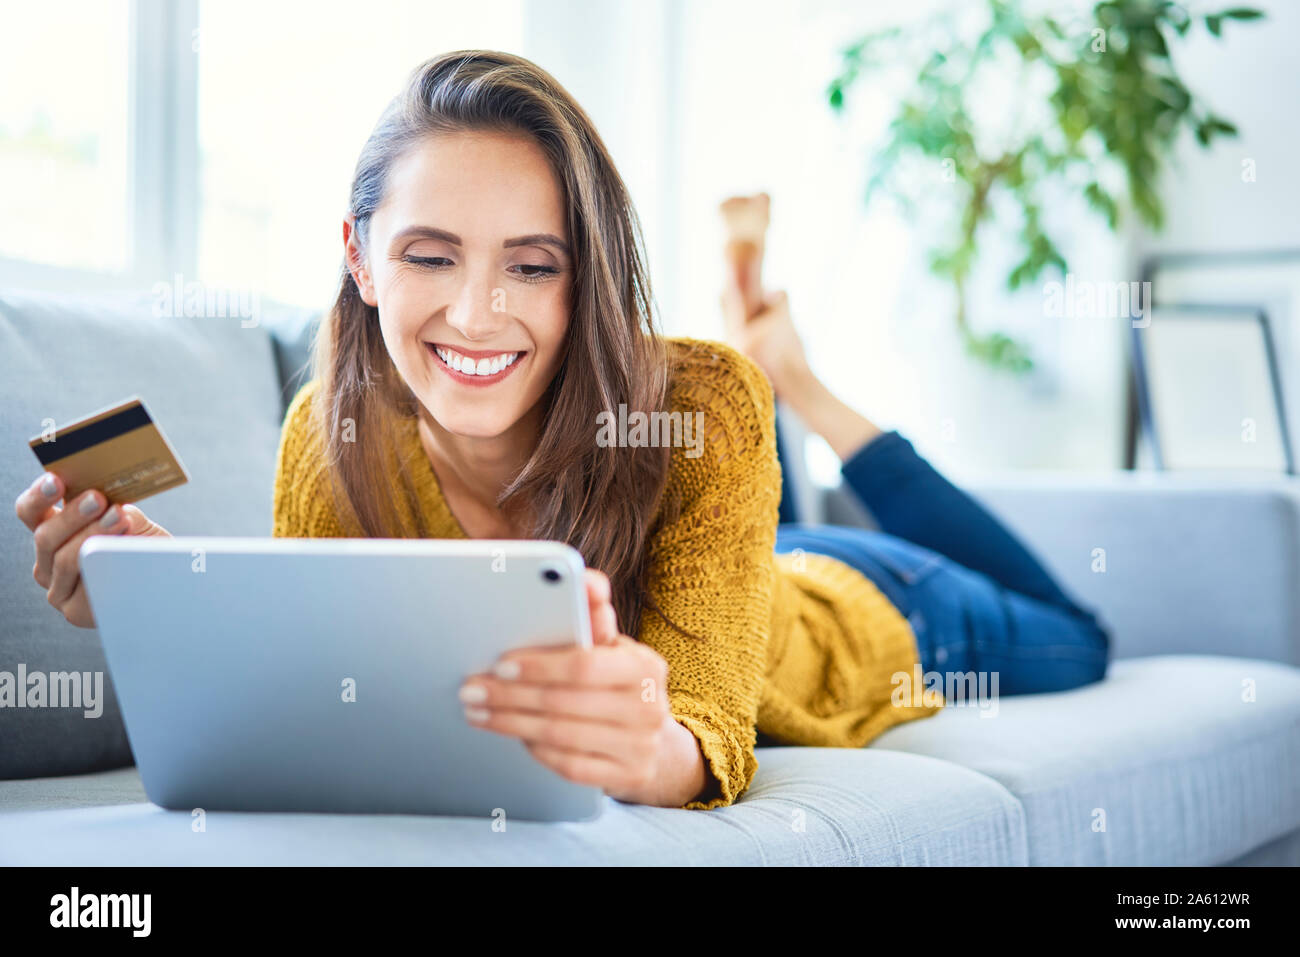 Cheerful young woman using credit card and tablet to shop online from home Stock Photo